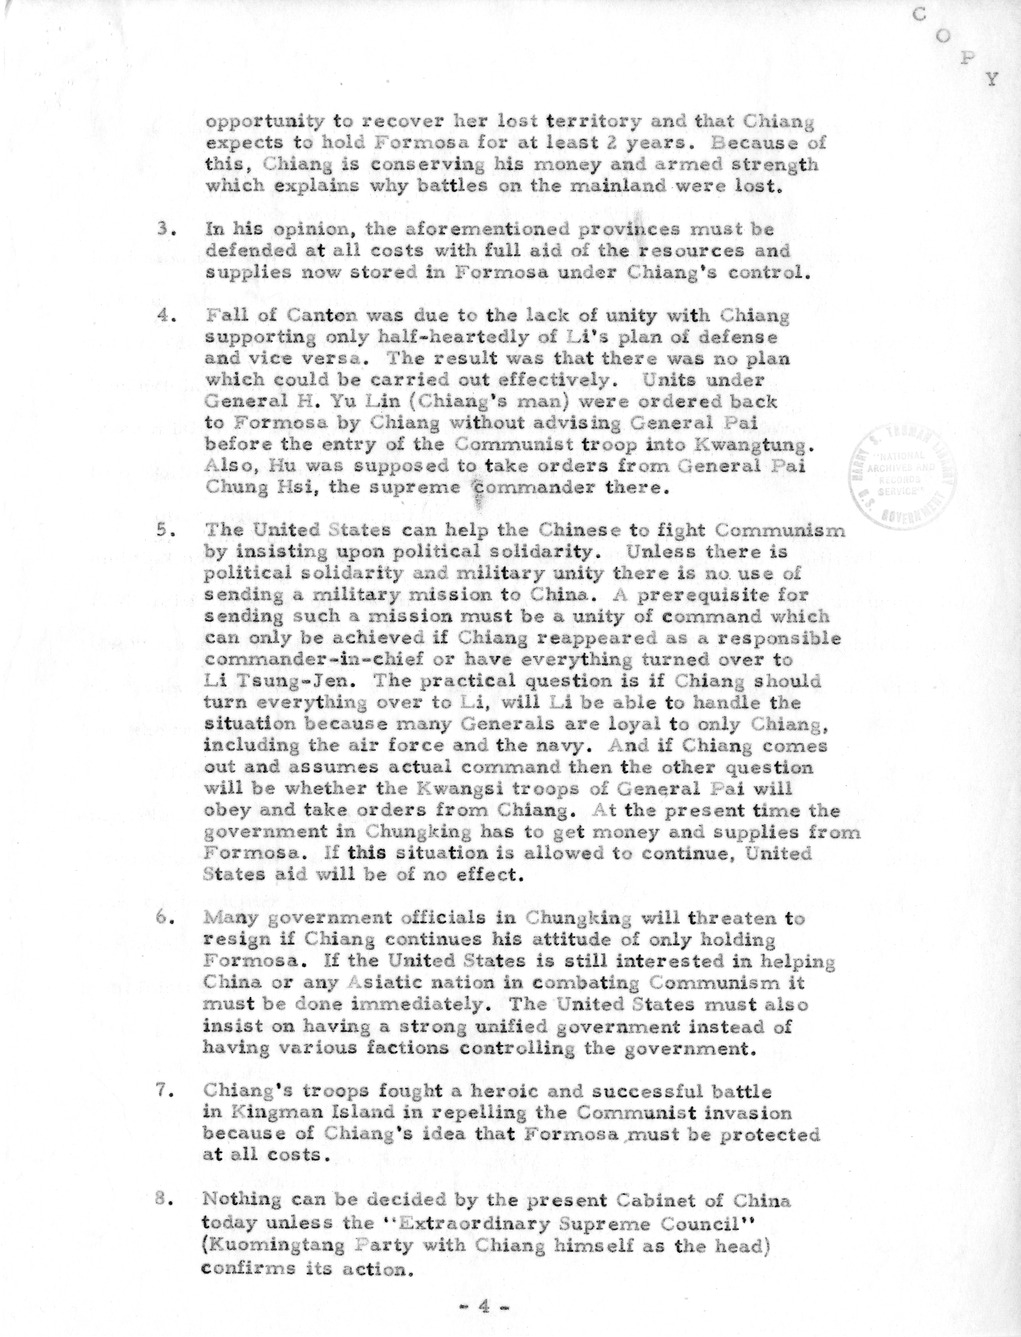 Memorandum from President Harry S. Truman to Secretary of State Dean Acheson, with Attachment